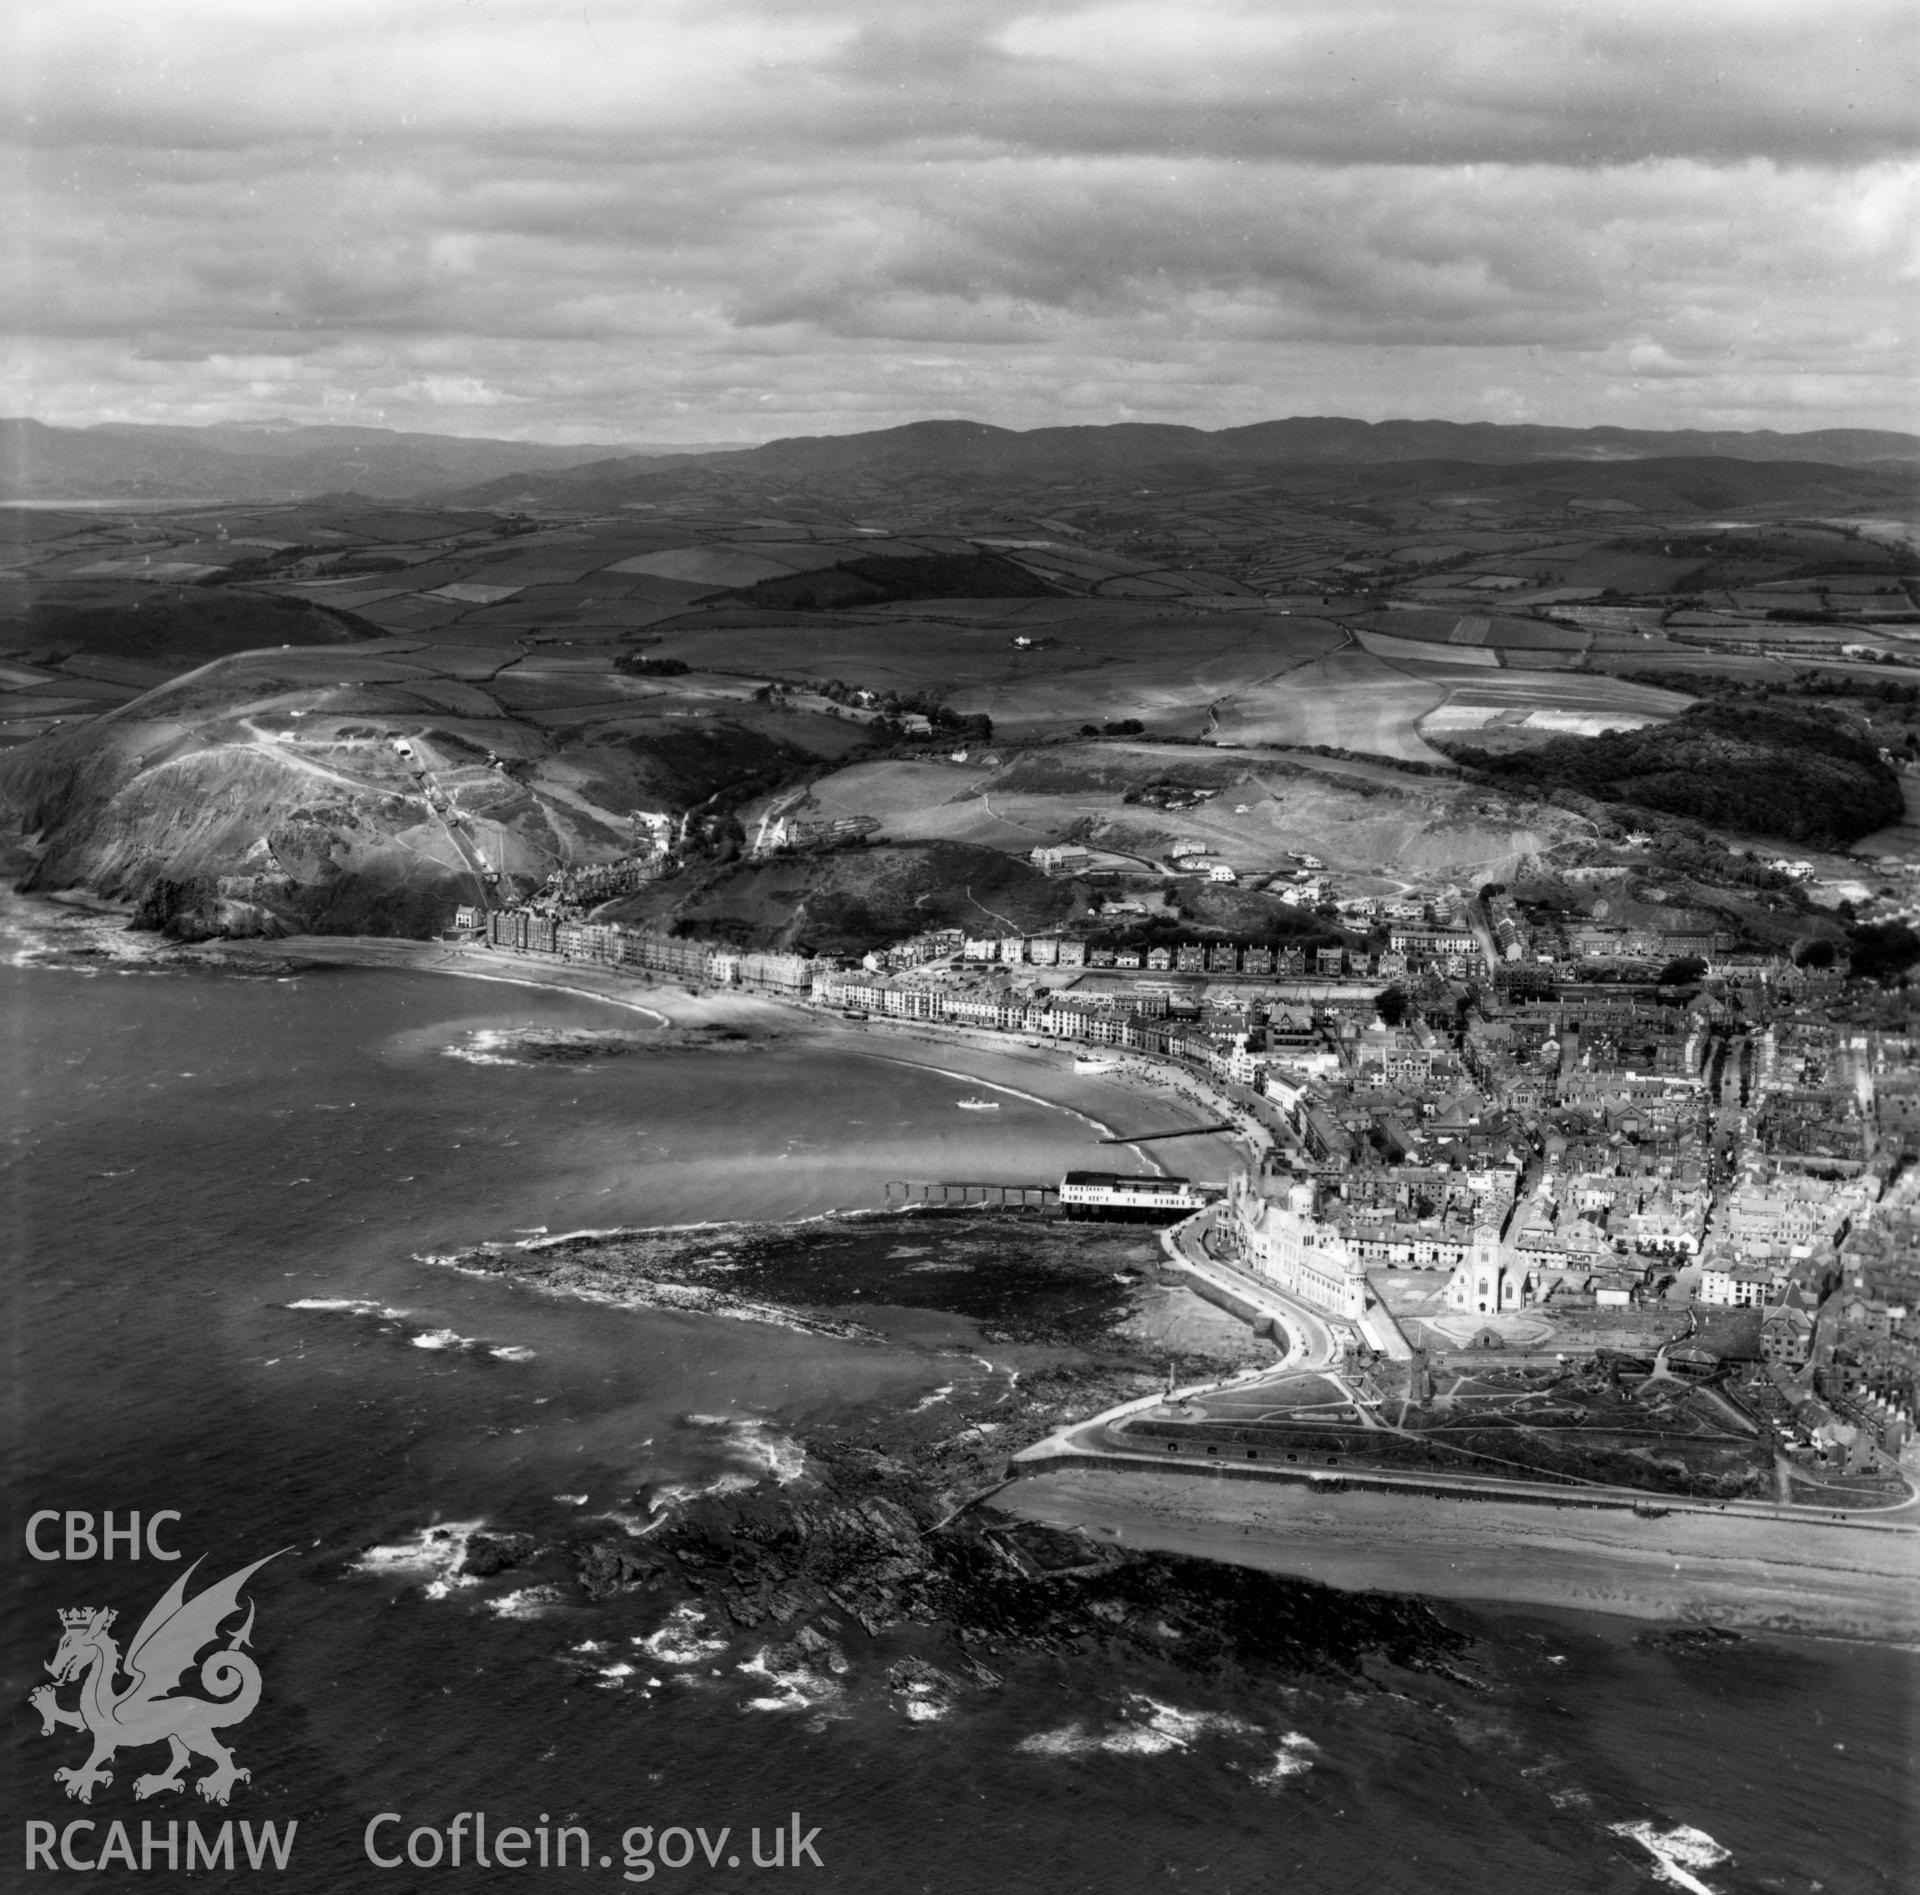 General view of Aberystwyth from the seafront looking north, showing town and hills to the north. Oblique aerial photograph, 5?" cut roll film.